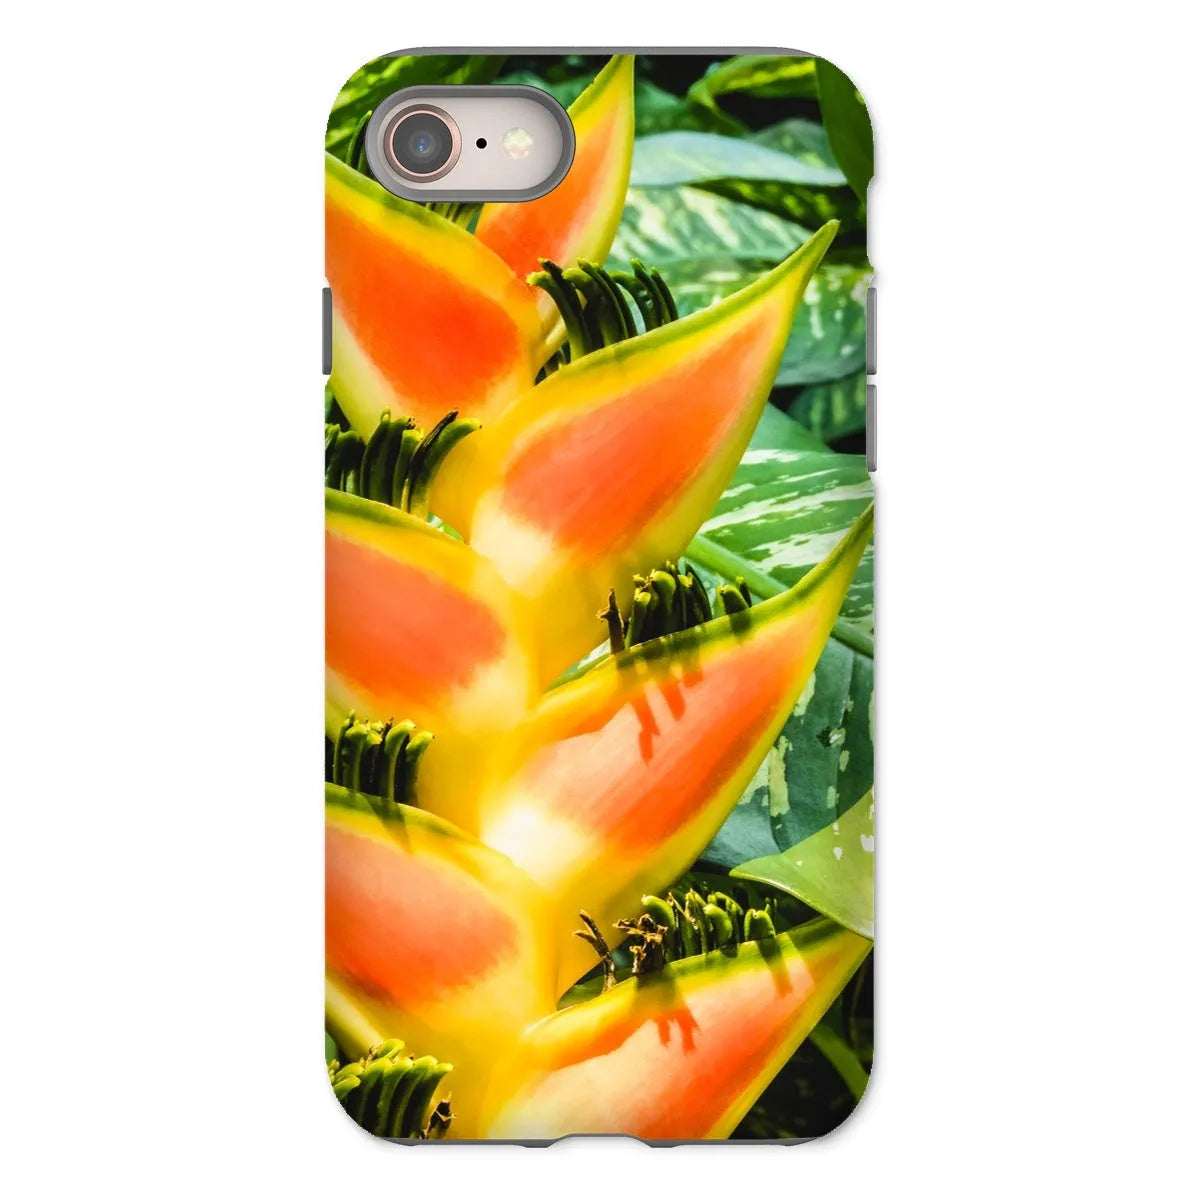 Showstopper Tough Phone Case - Iphone 8 / Matte - Mobile Phone Cases - Aesthetic Art